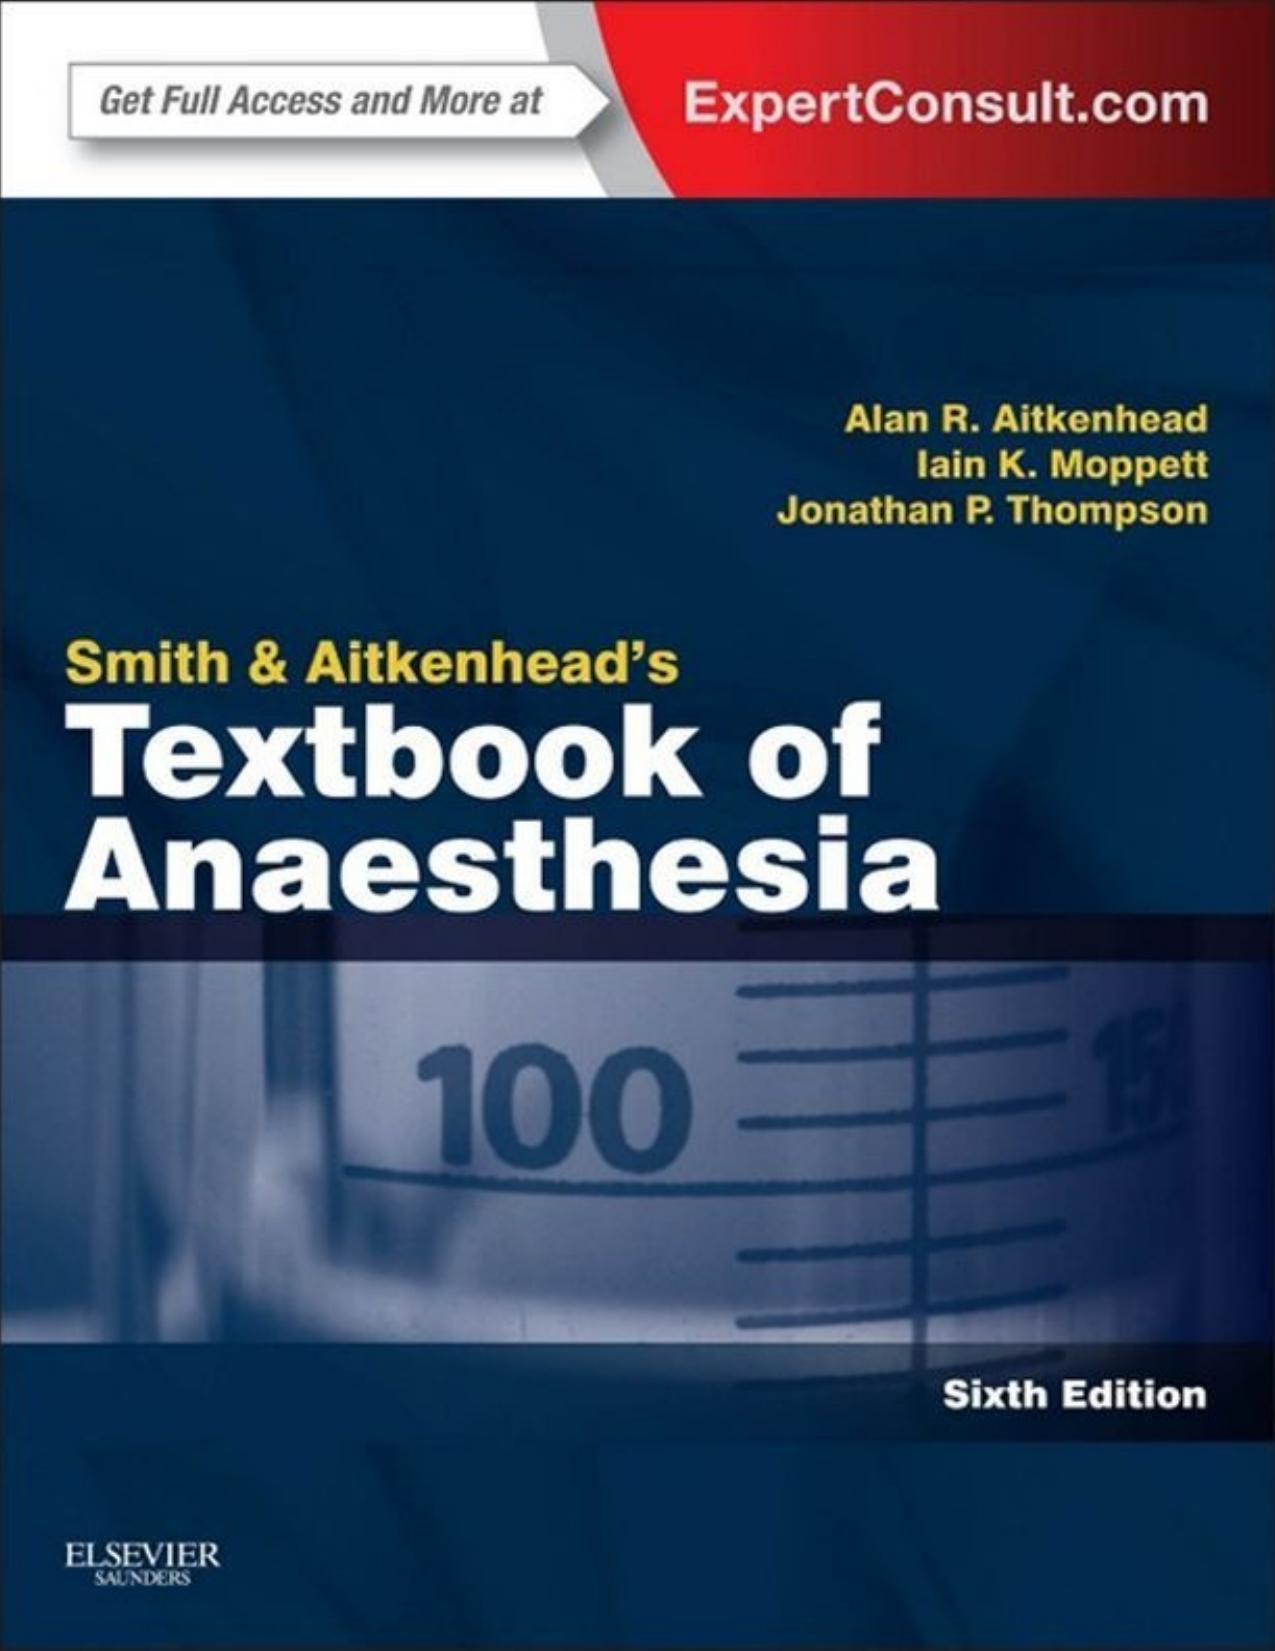 Smith and Aitkenhead\'s Textbook of Anaesthesia - PDFDrive.com